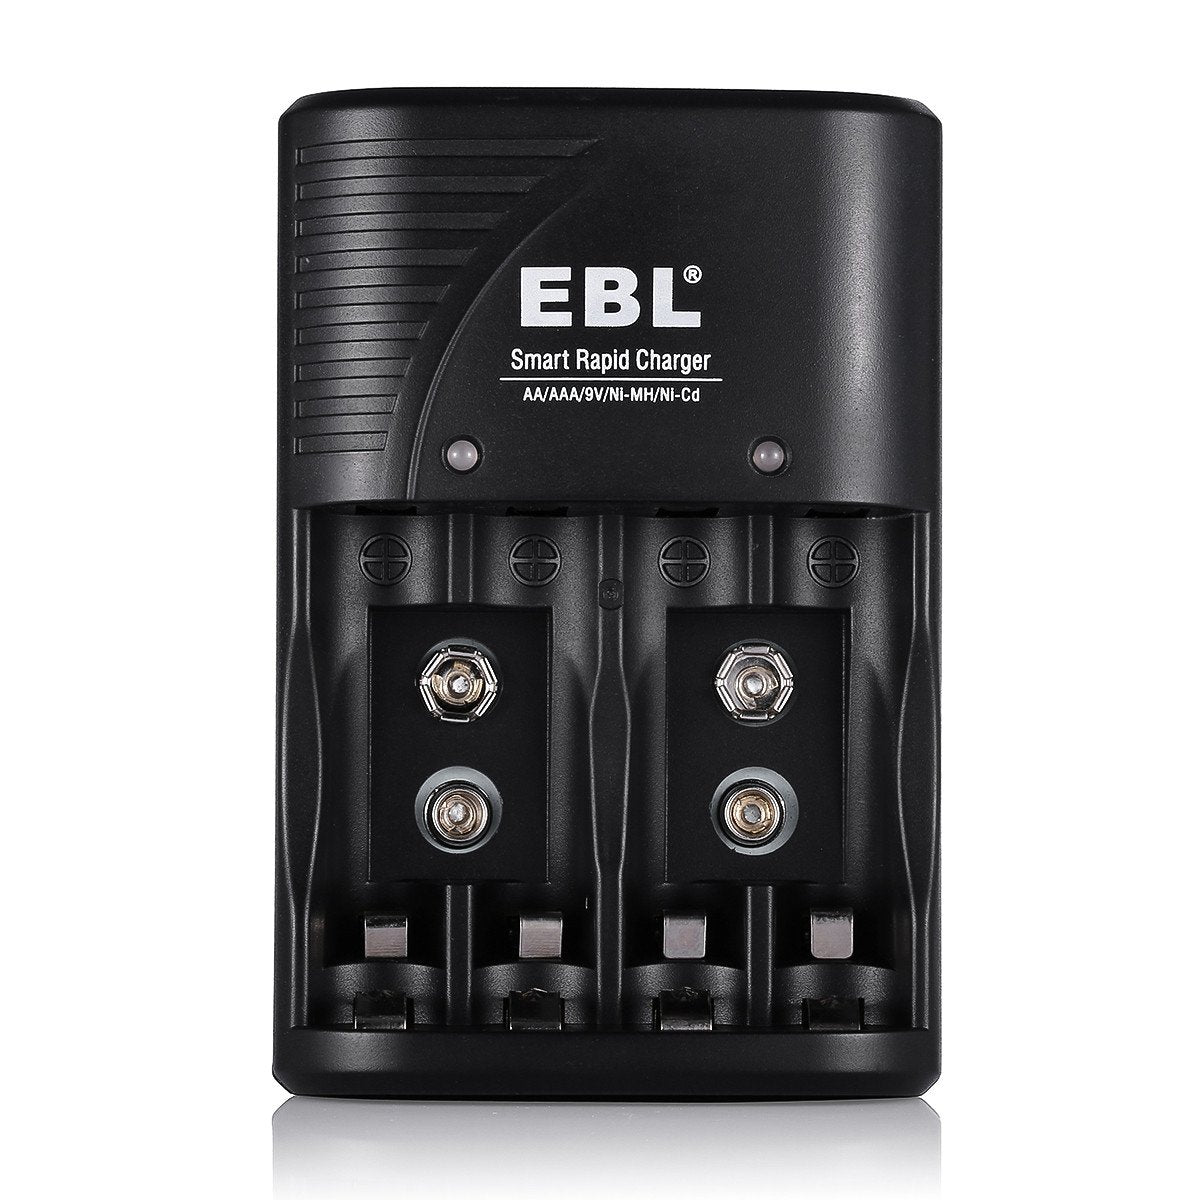 EBL 802 6 Bay Smart fast Battery Charger for AA AAA 9V Batteries